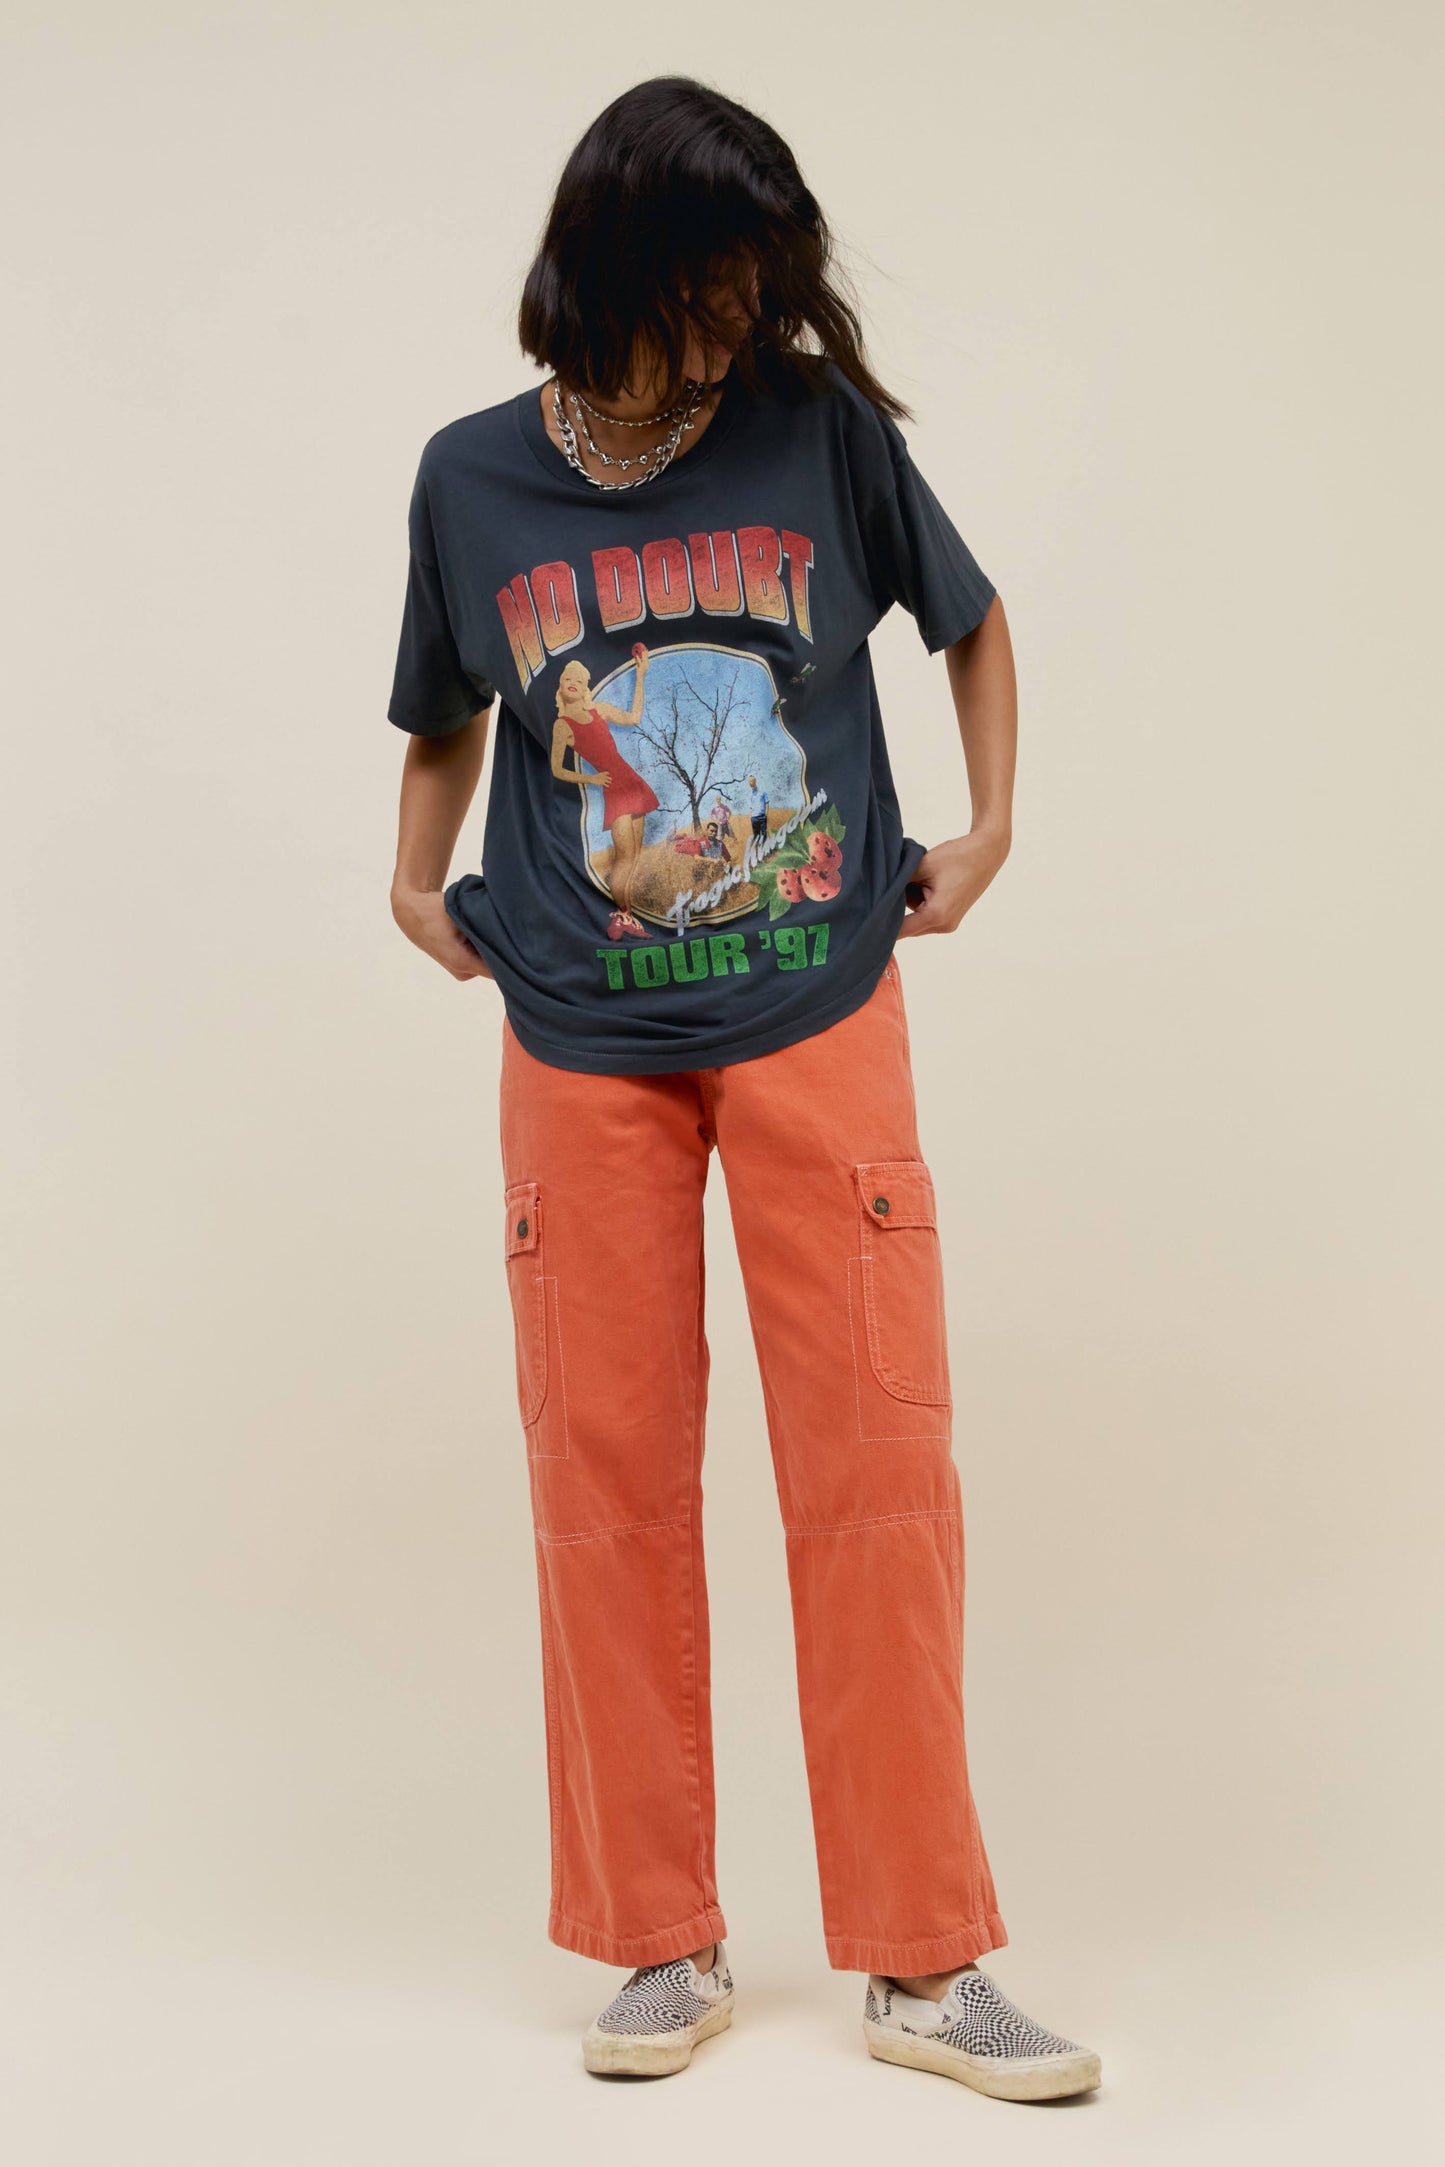 Model with bob wearing No Doubt black graphic tee and orange pants.